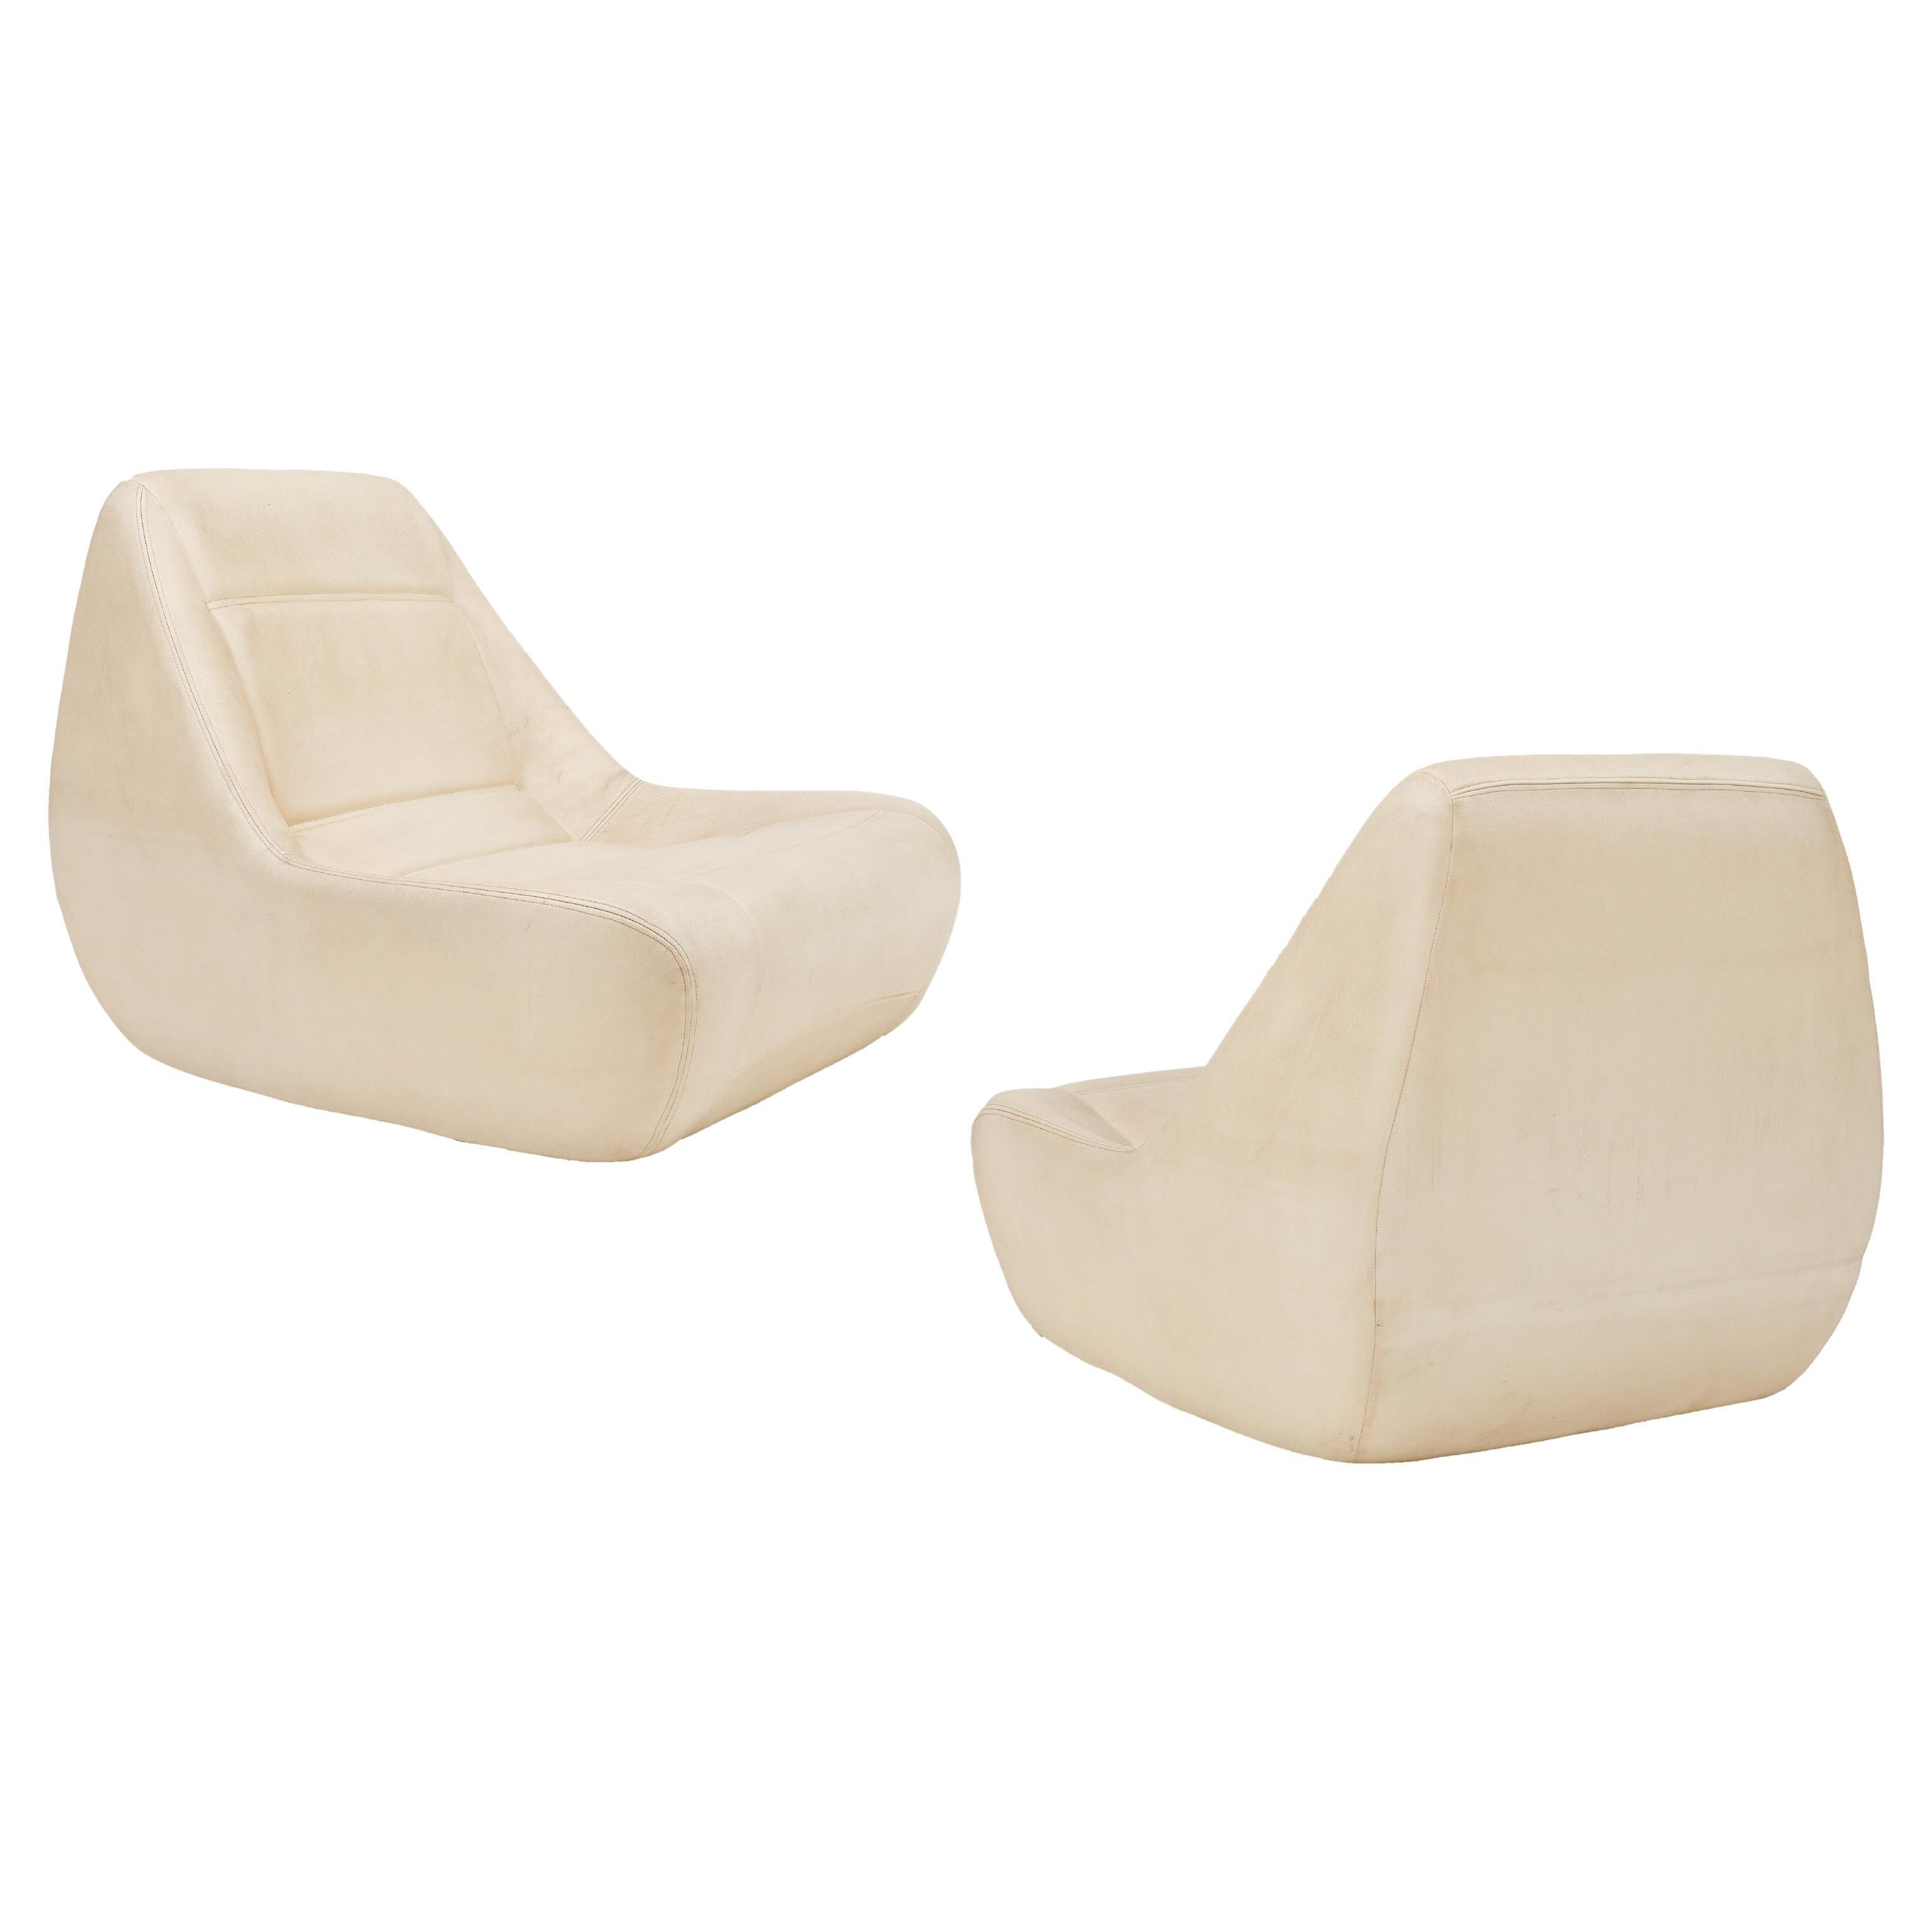 Incredible and comfortable space age lounge chairs. Would be incredible in a media room, kids room. Cool and Chic vibe. Imported from France. Made in 1970's. Amazing as is or can be reupholstered.